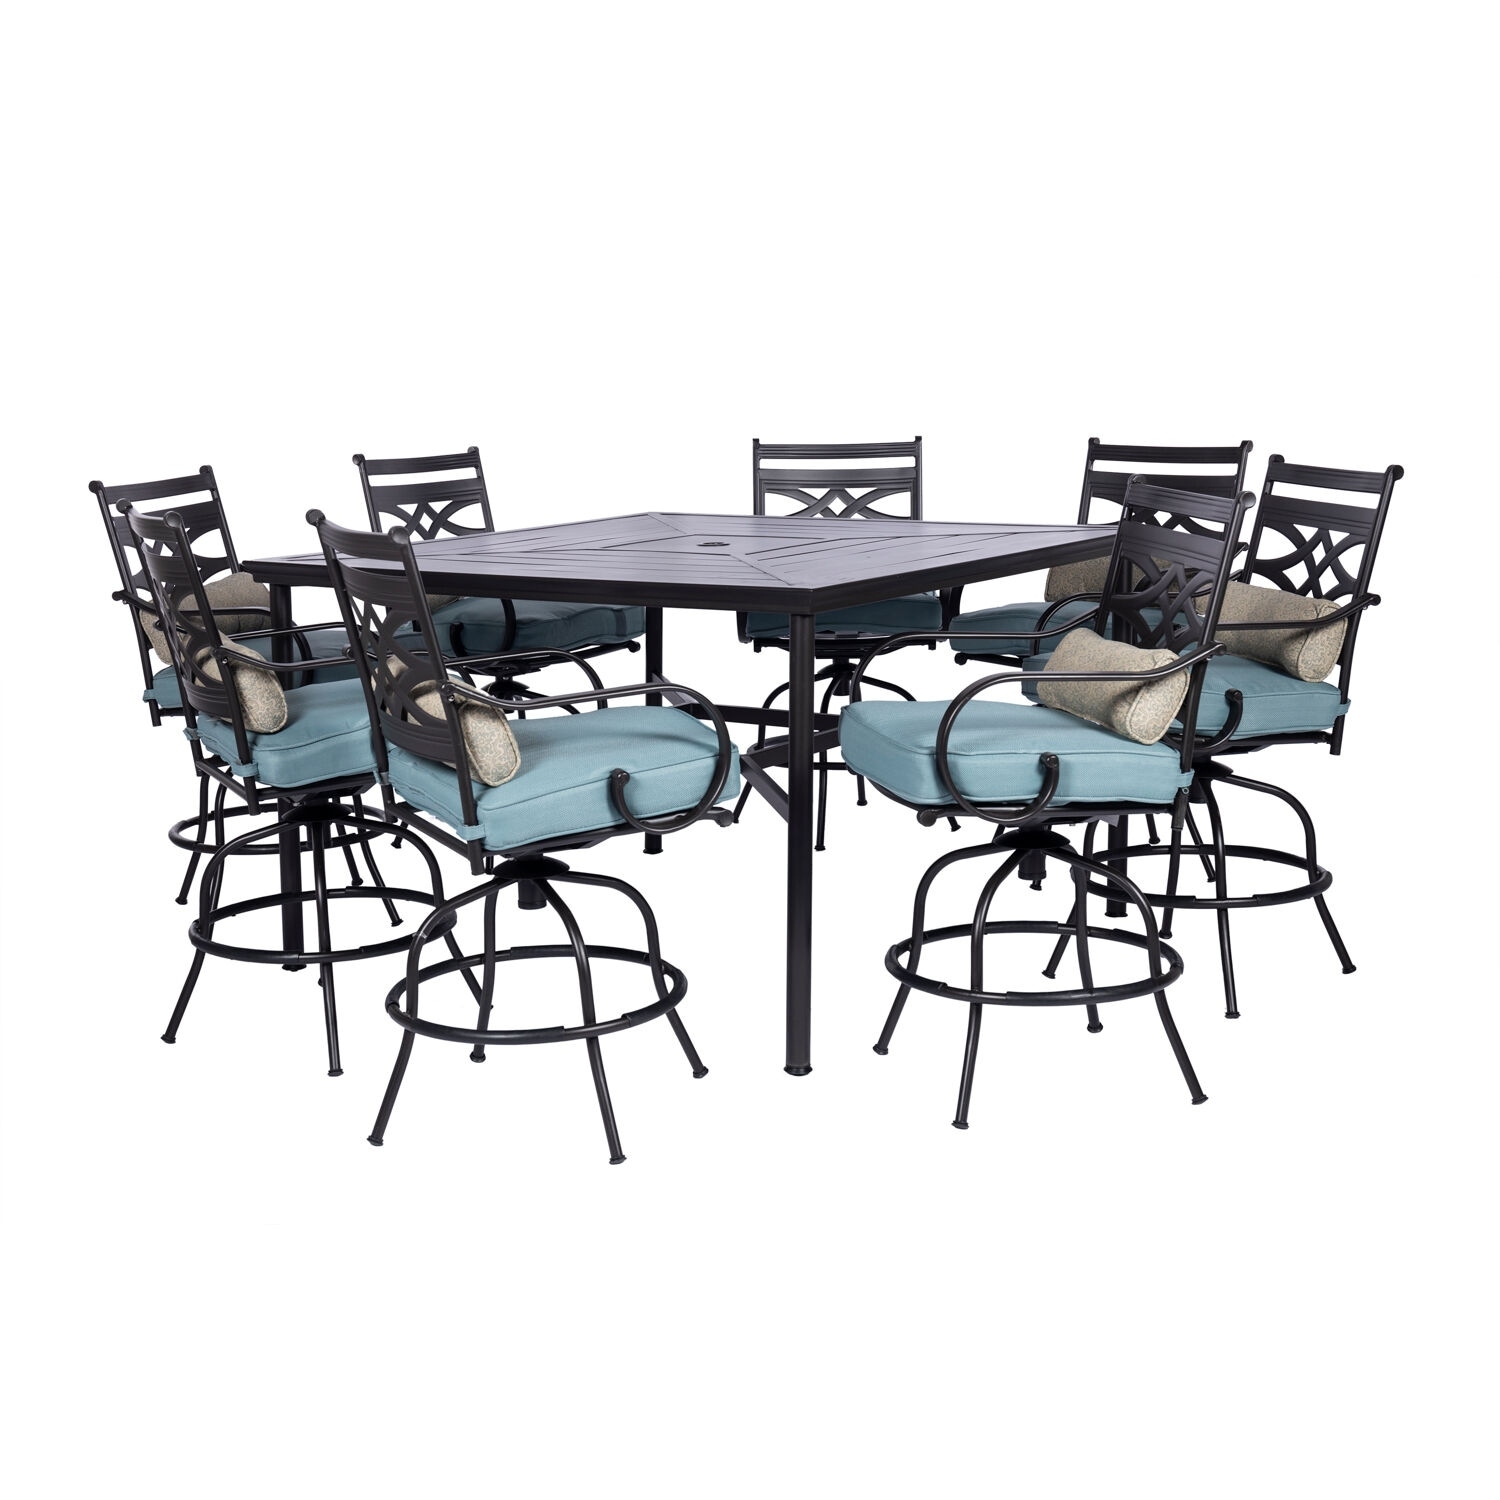 Hanover Montclair 9-piece High-dining Set In Ocean Blue With 8 Counter-height Swivel Chairs And 60-inch Square Table